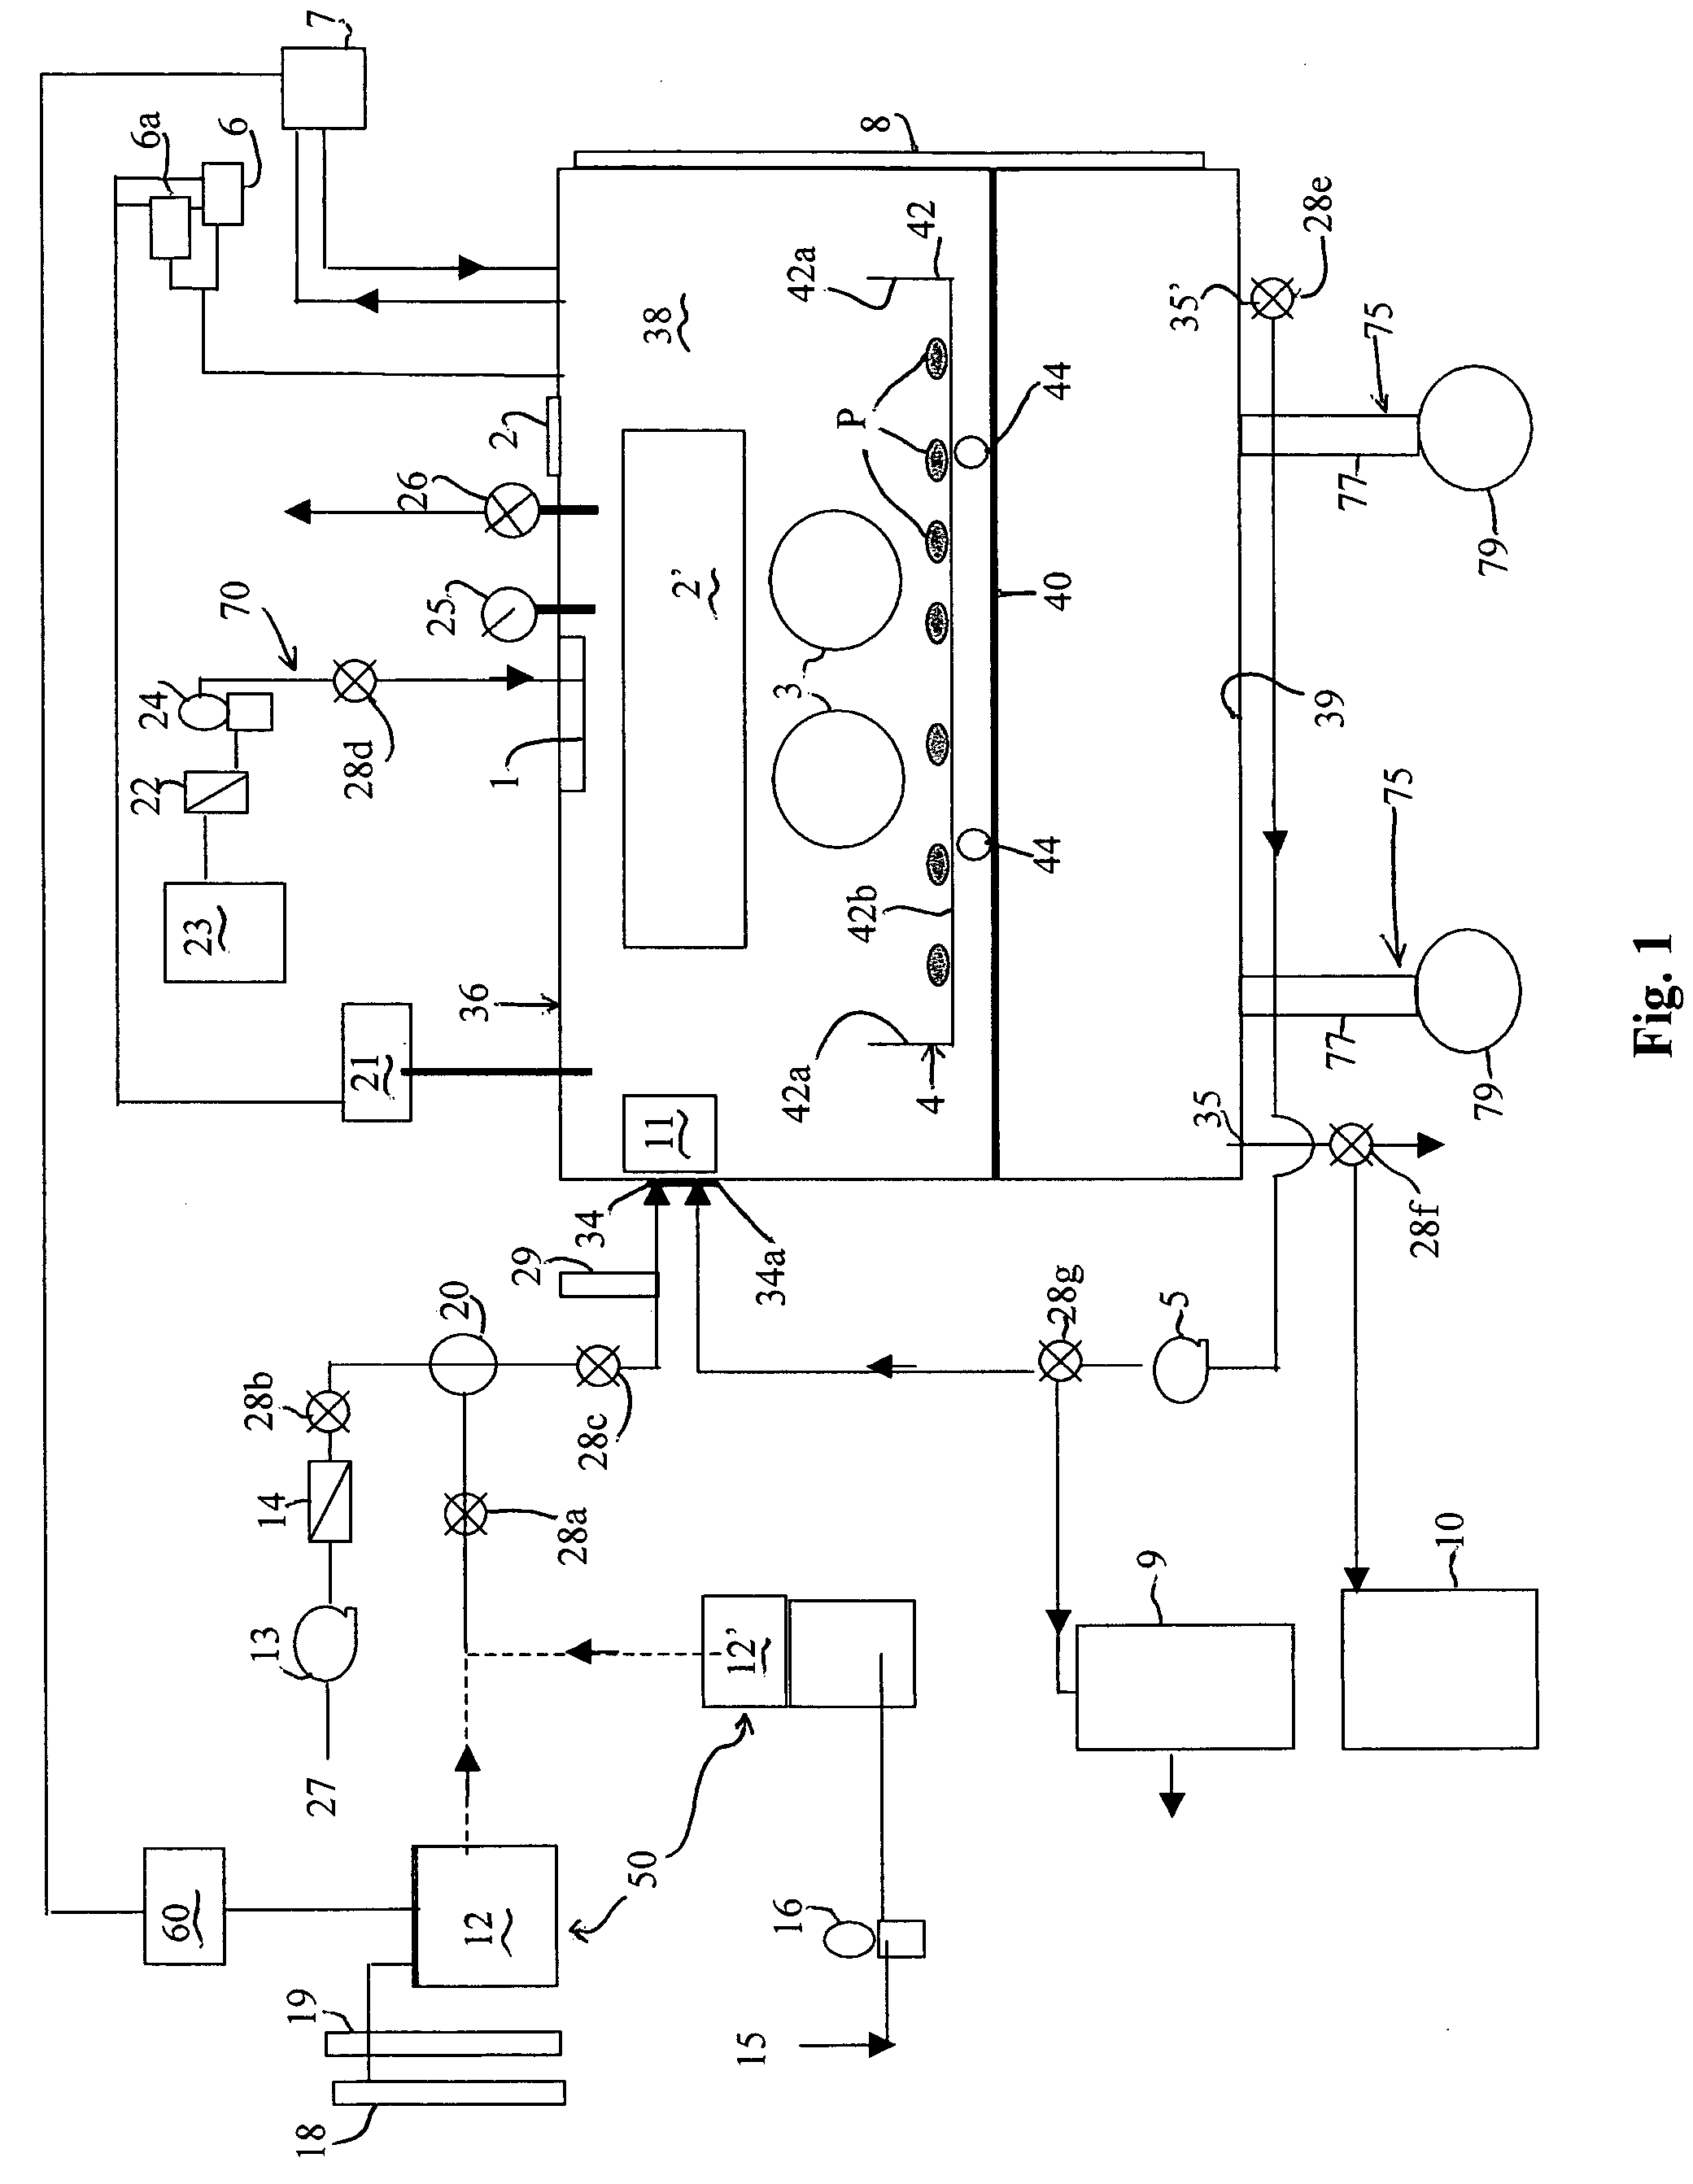 Apparatus and method for reducing microorganisms on produce using chlorine dioxide gas